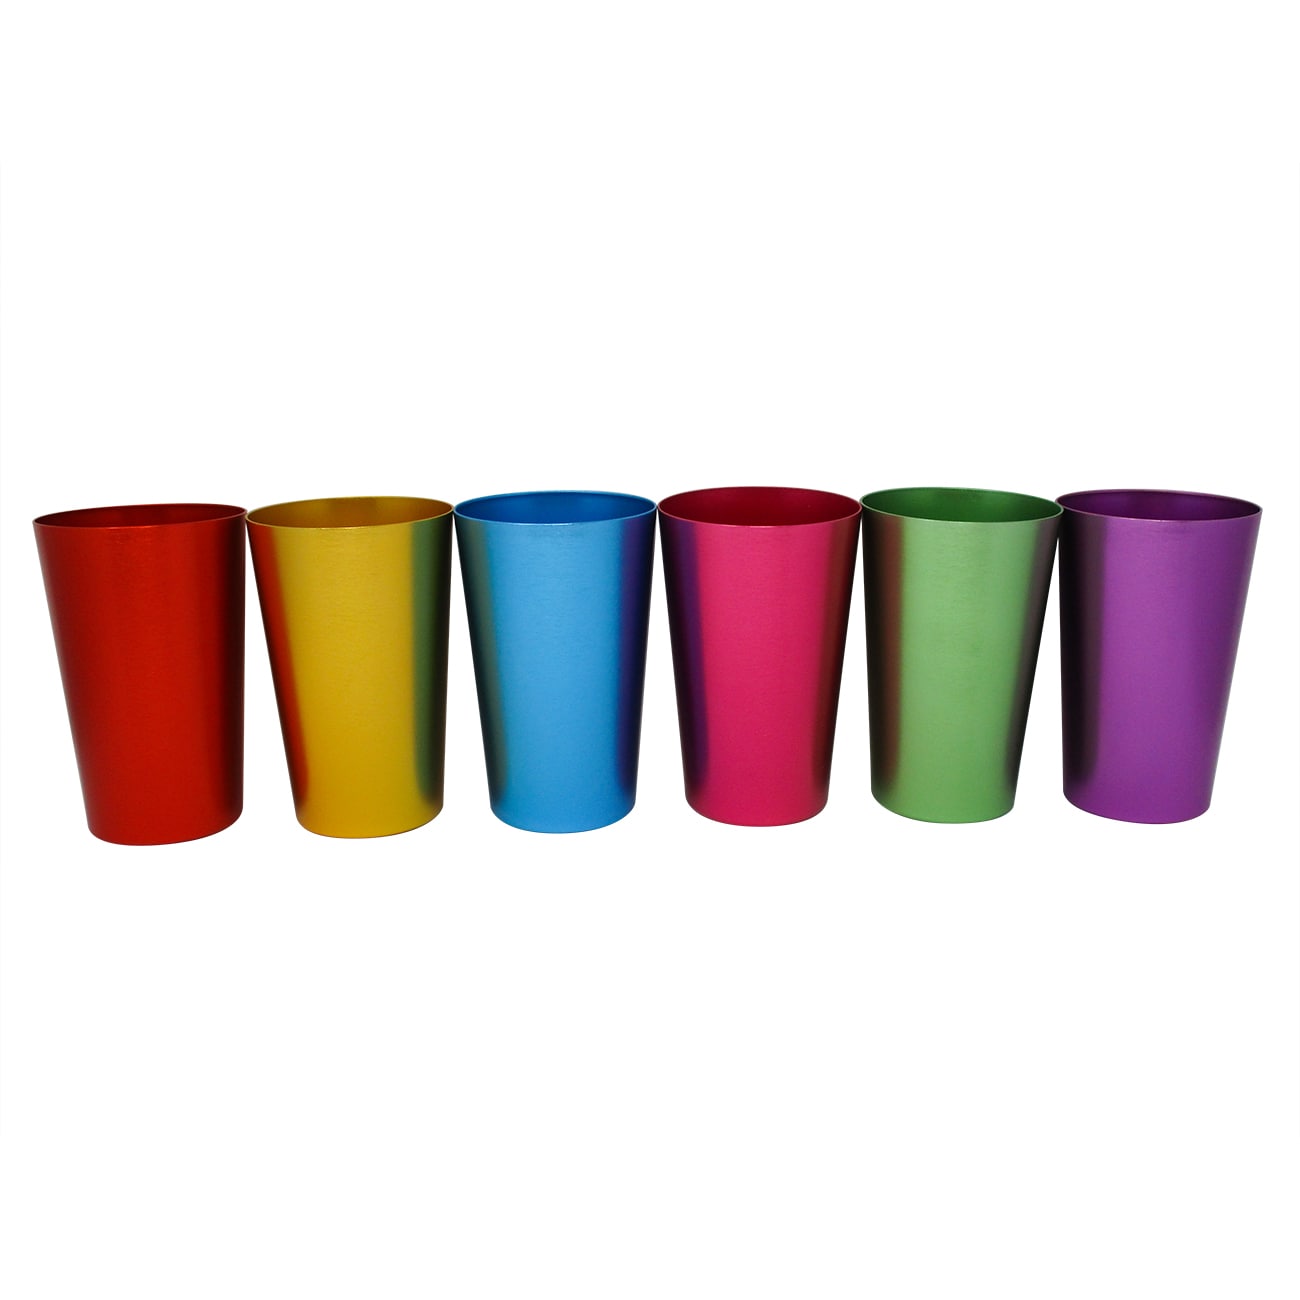 Trademark Innovations 14-fl oz Stainless Steel Multicolored Cup